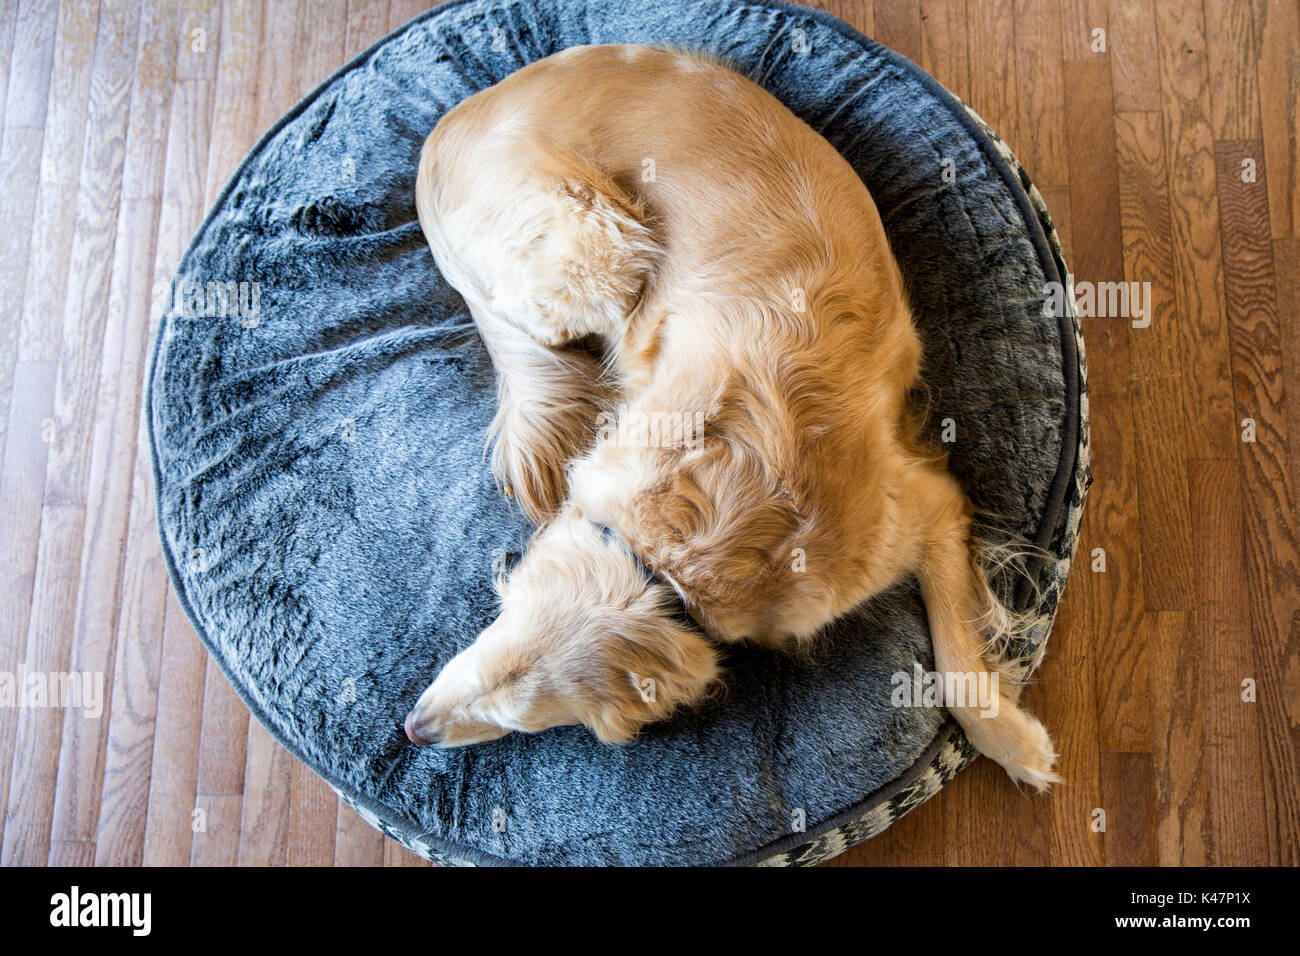 Male Golden Retriever sleeping on his dog bed Stock Photo